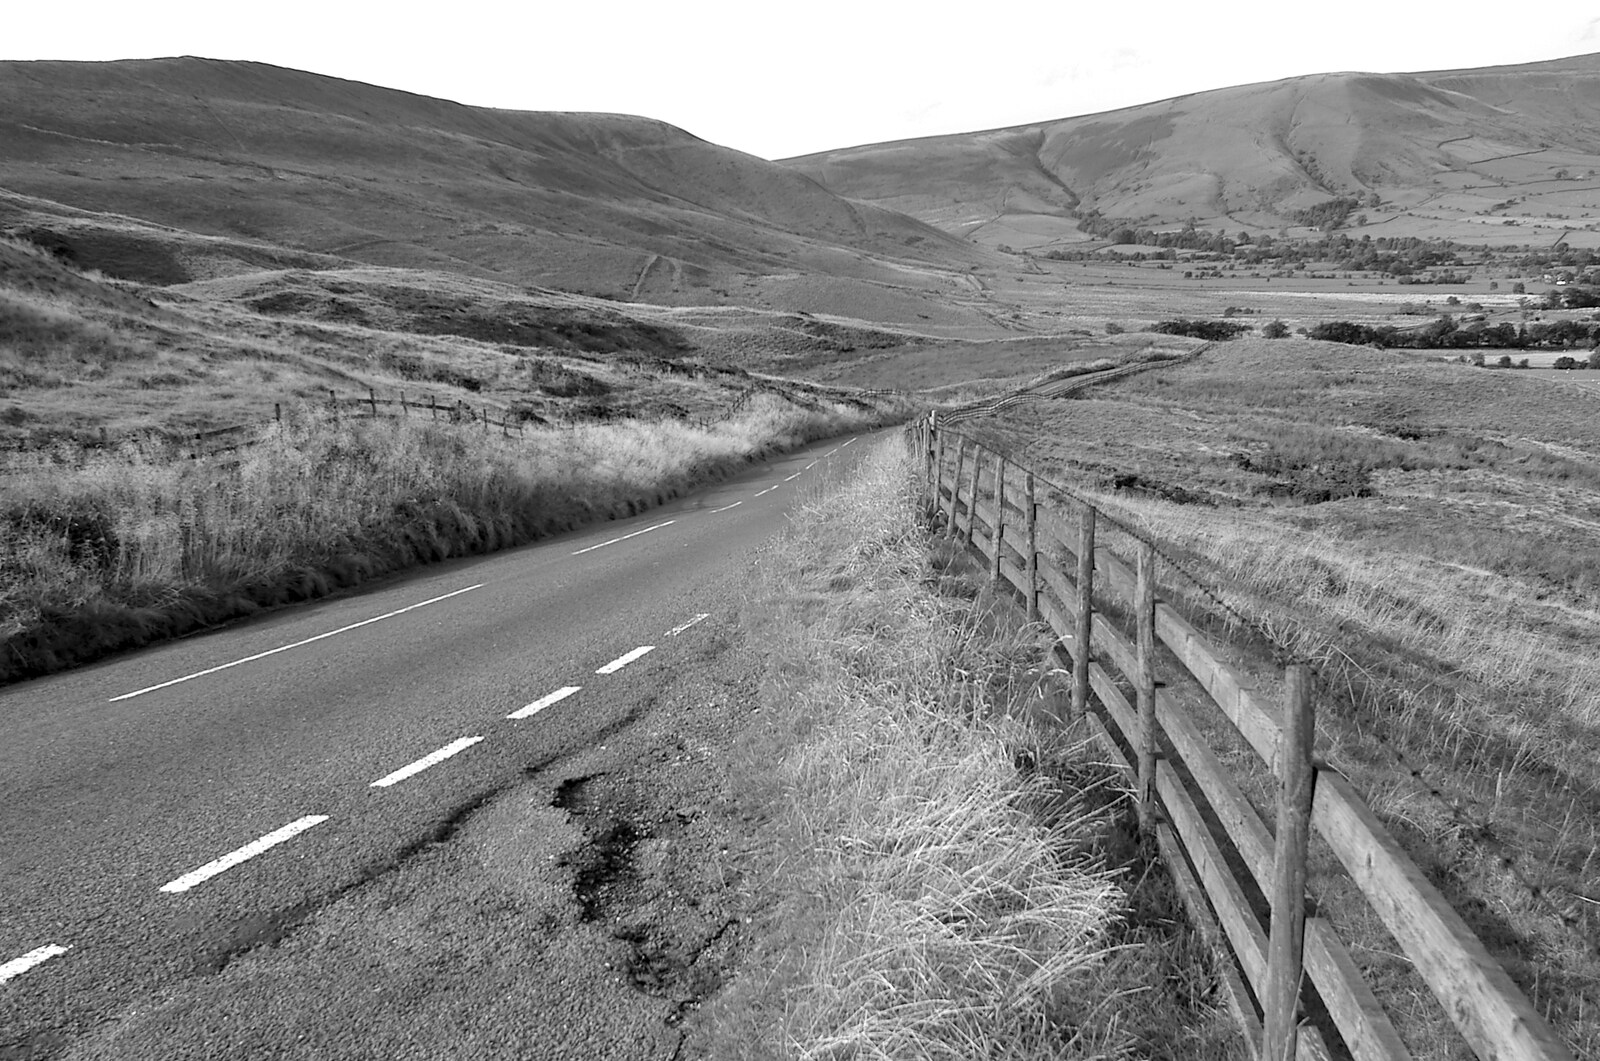 The Pennine Way: Lost on Kinder Scout, Derbyshire - 9th October 2005: A road across the Pennines